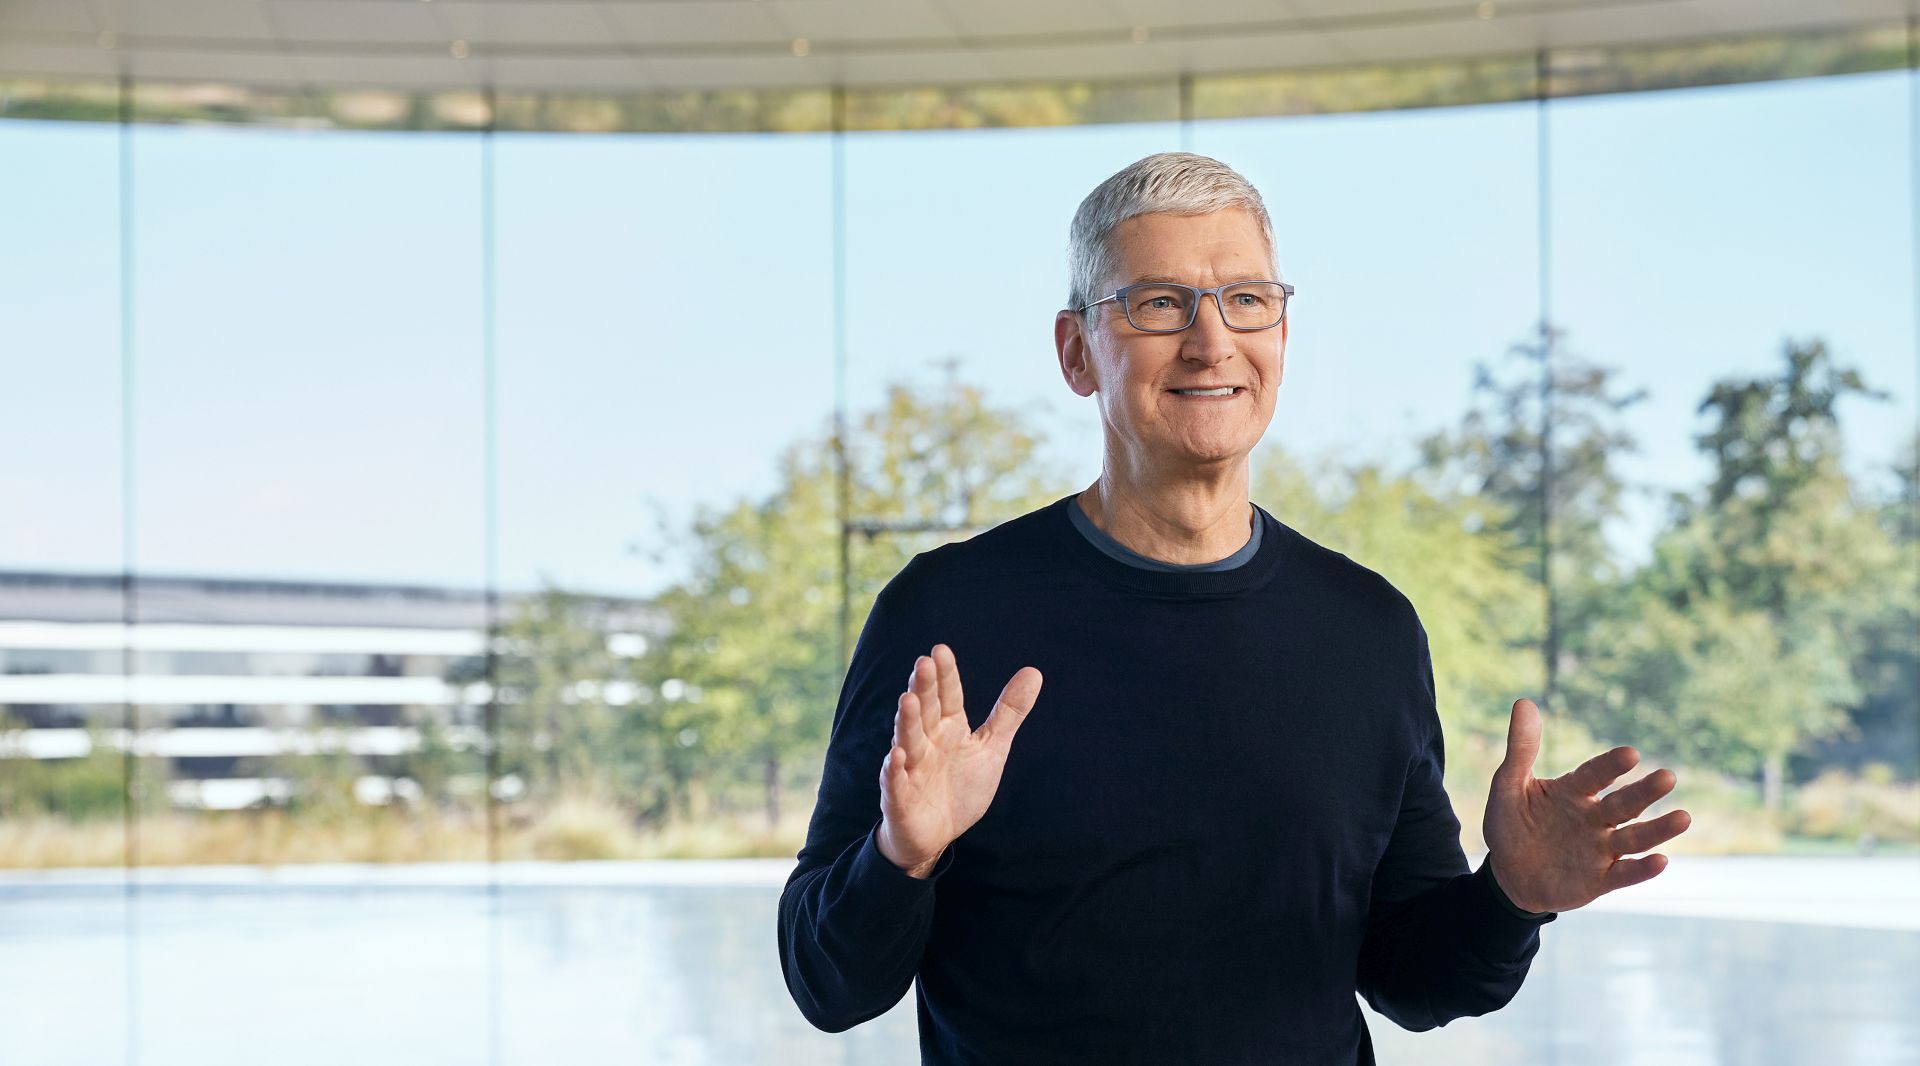 epa08741212 Handout image released by Apple showing Apple CEO Tim Cook kicking off a special event at Apple Park in Cupertino, California, USA, 13 October 2020. Apple is expected to introduce several new products including a new iPhone.  EPA/BROOKS KRAFT / APPLE INC. / HO EDITORIAL USE ONLY, NO SALES